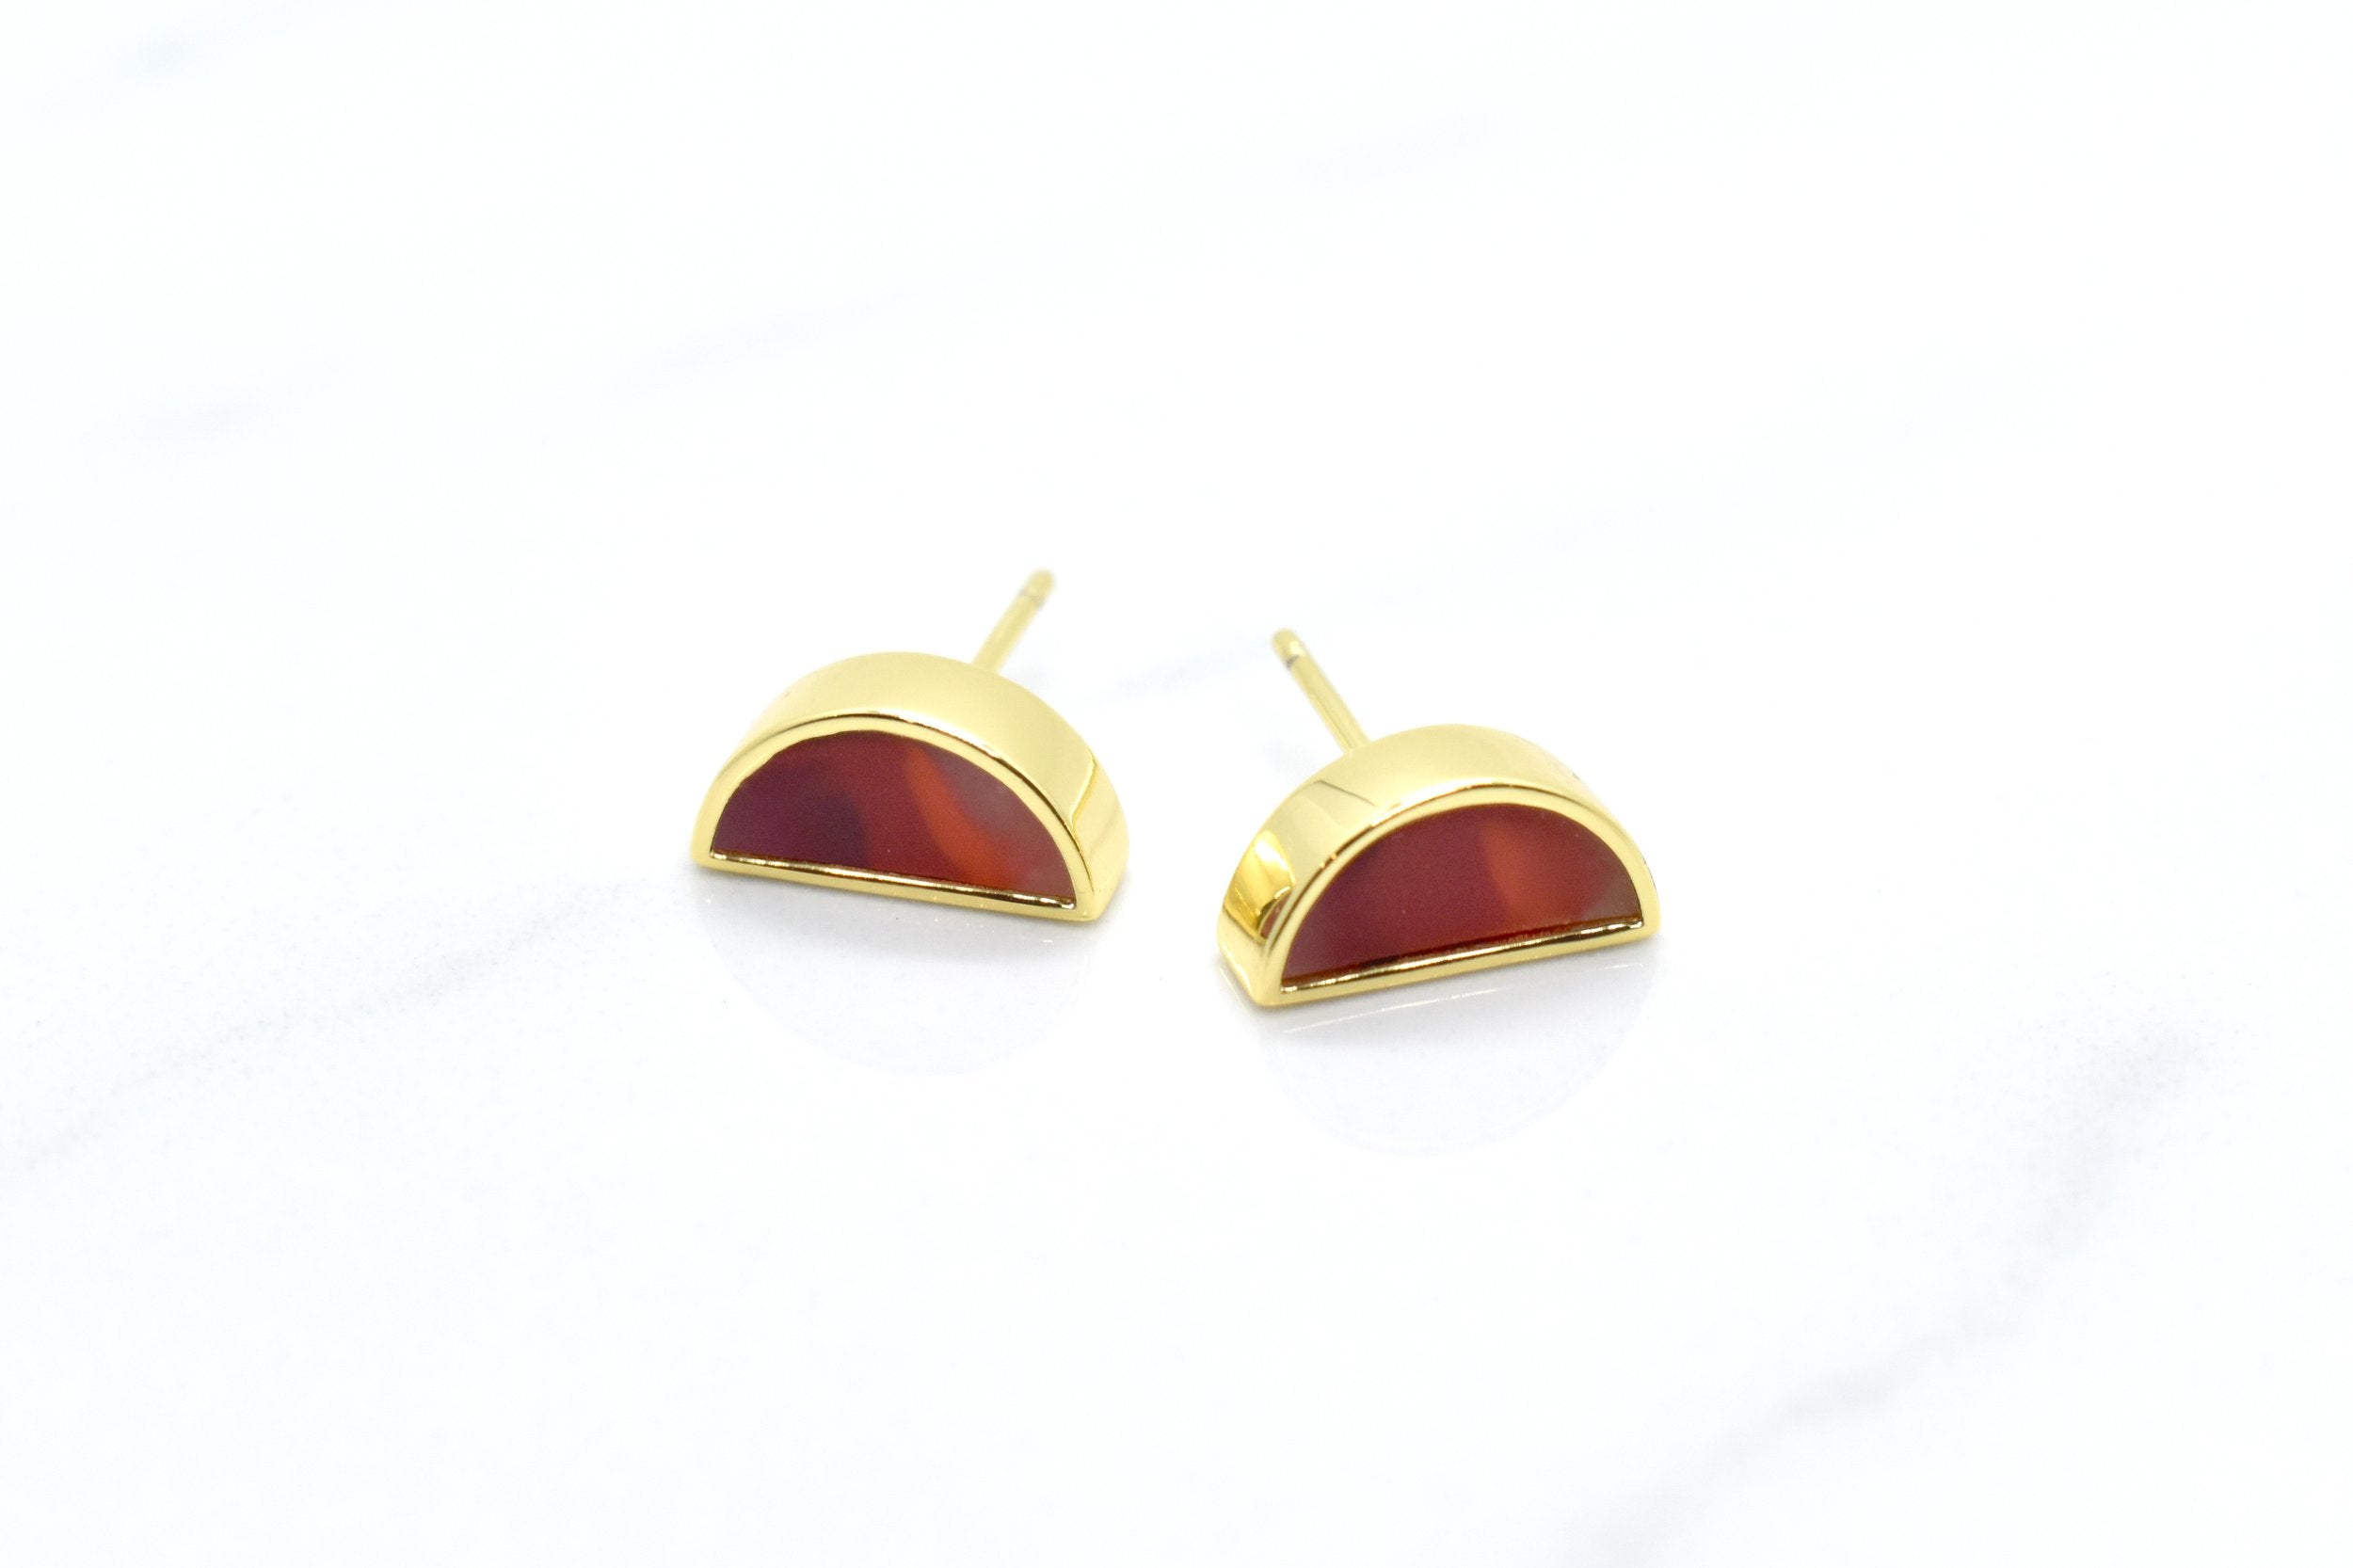 ruby studs with 24k gold plated moon stud earrings on a white background